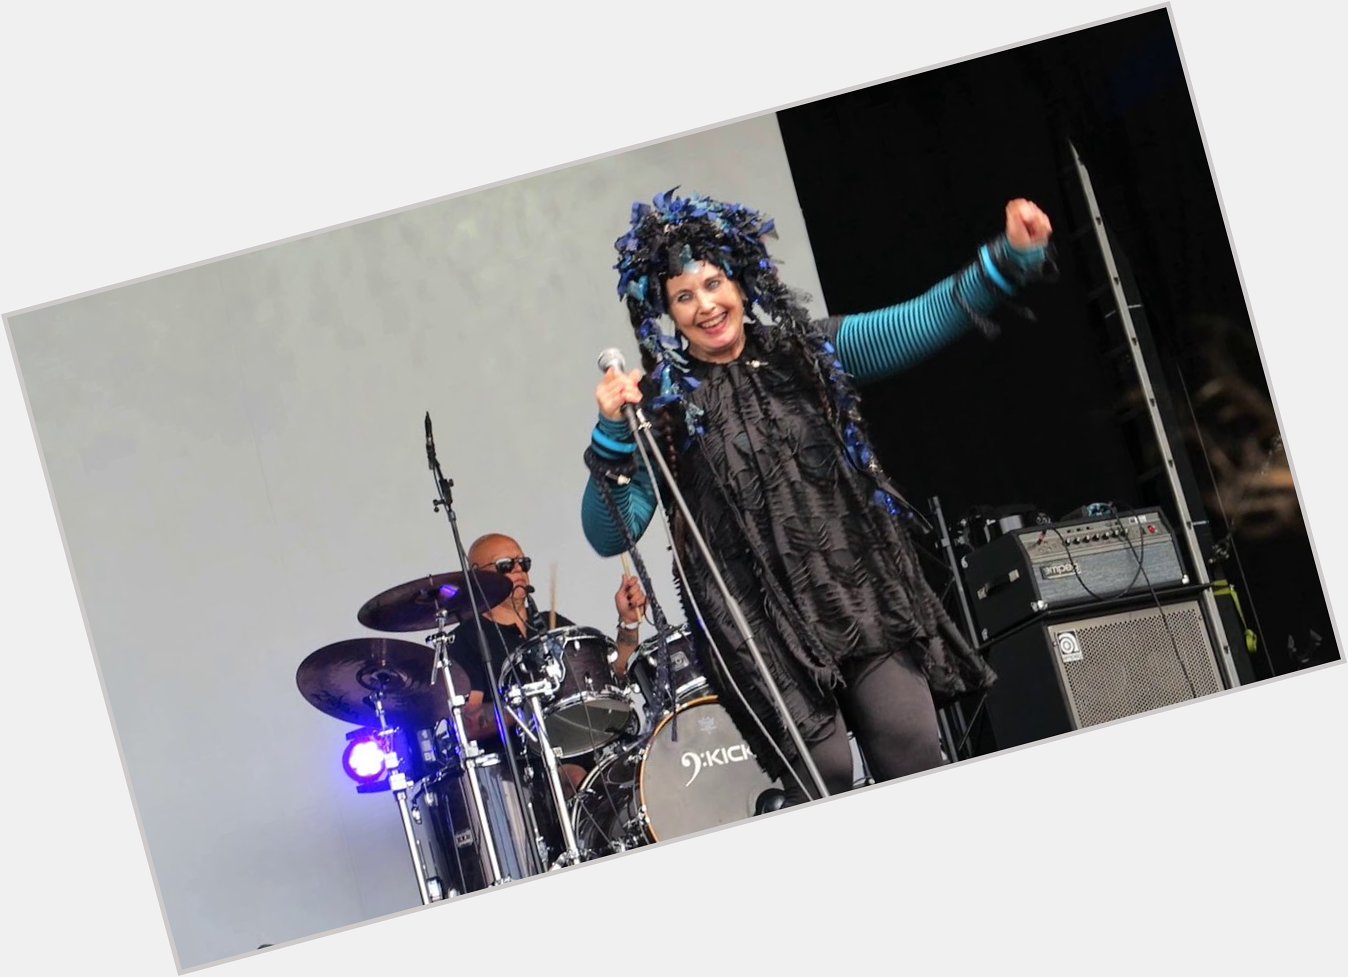 Please join me here at in wishing the one and only Lene Lovich a very Happy Birthday today  